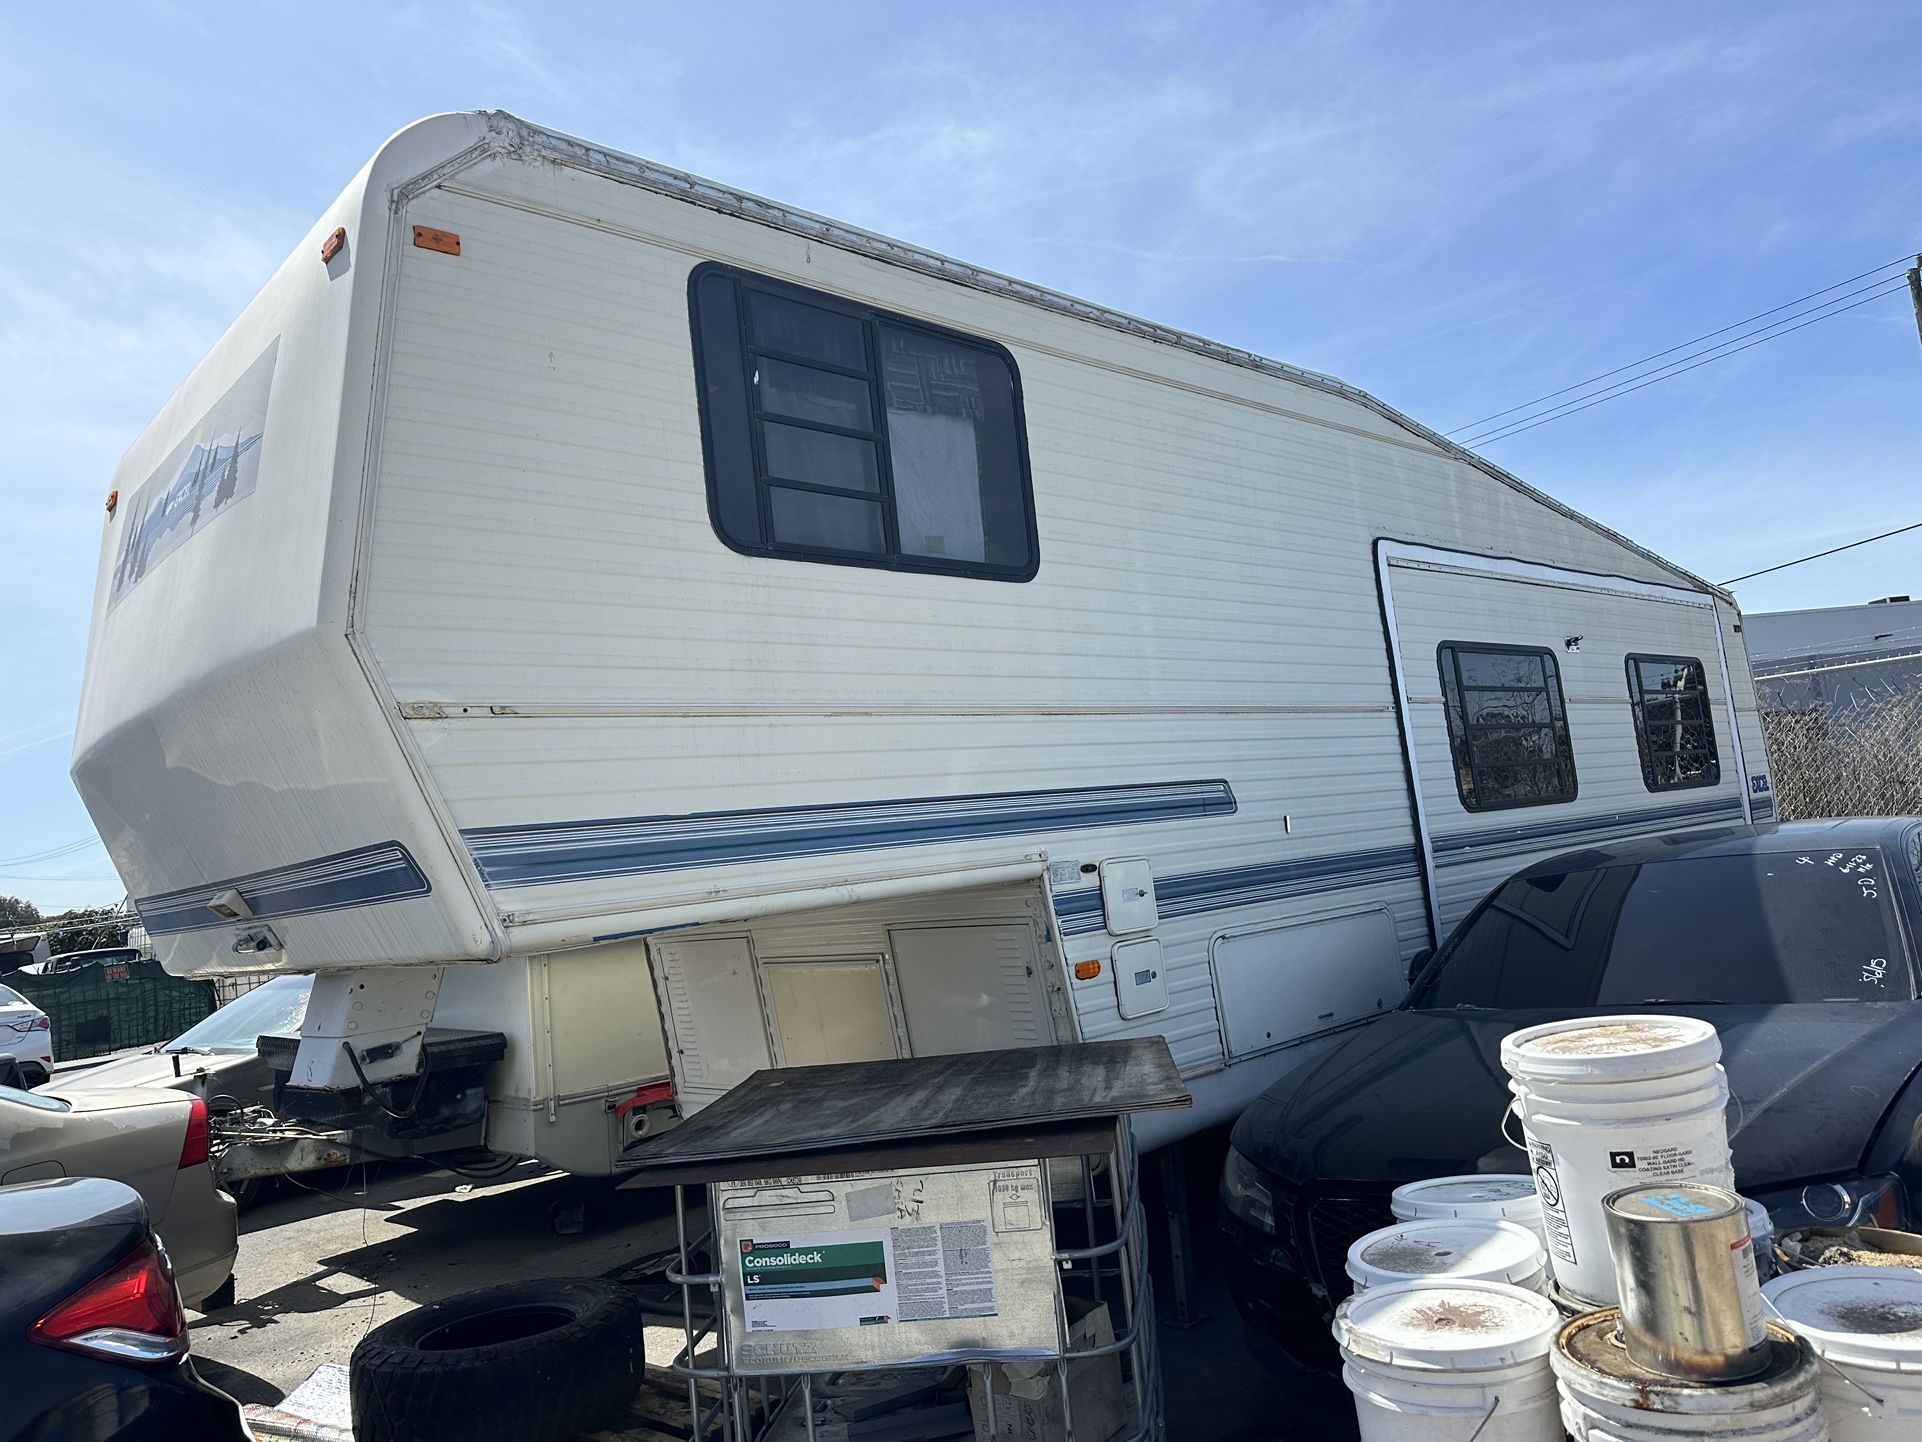 RV FOR SALE